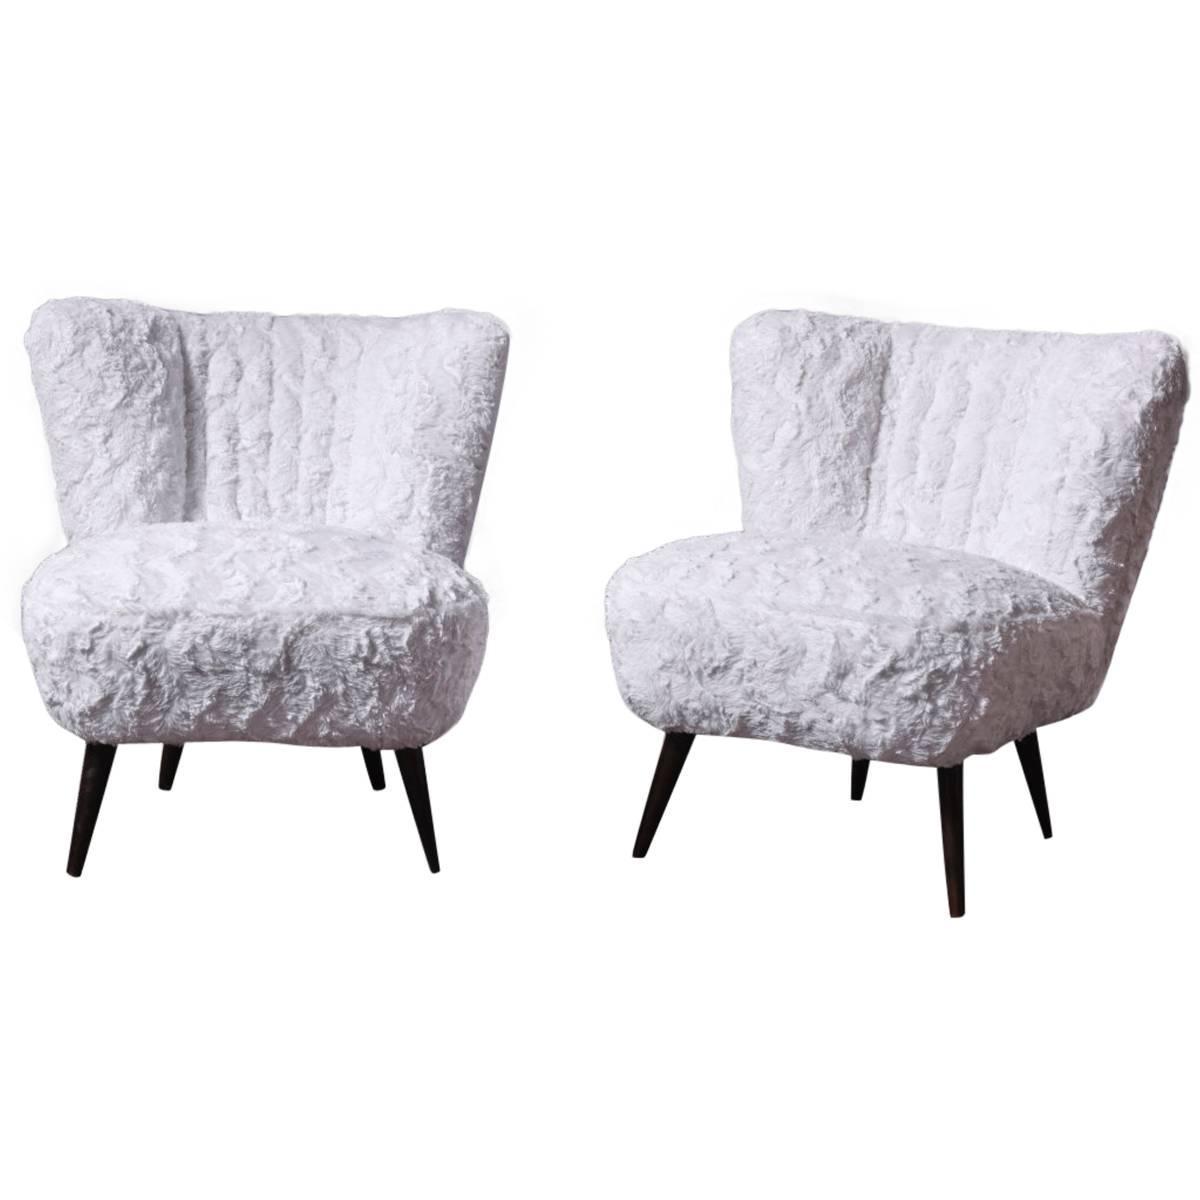 Pair Of Cocktail Chairs White Faux Fur